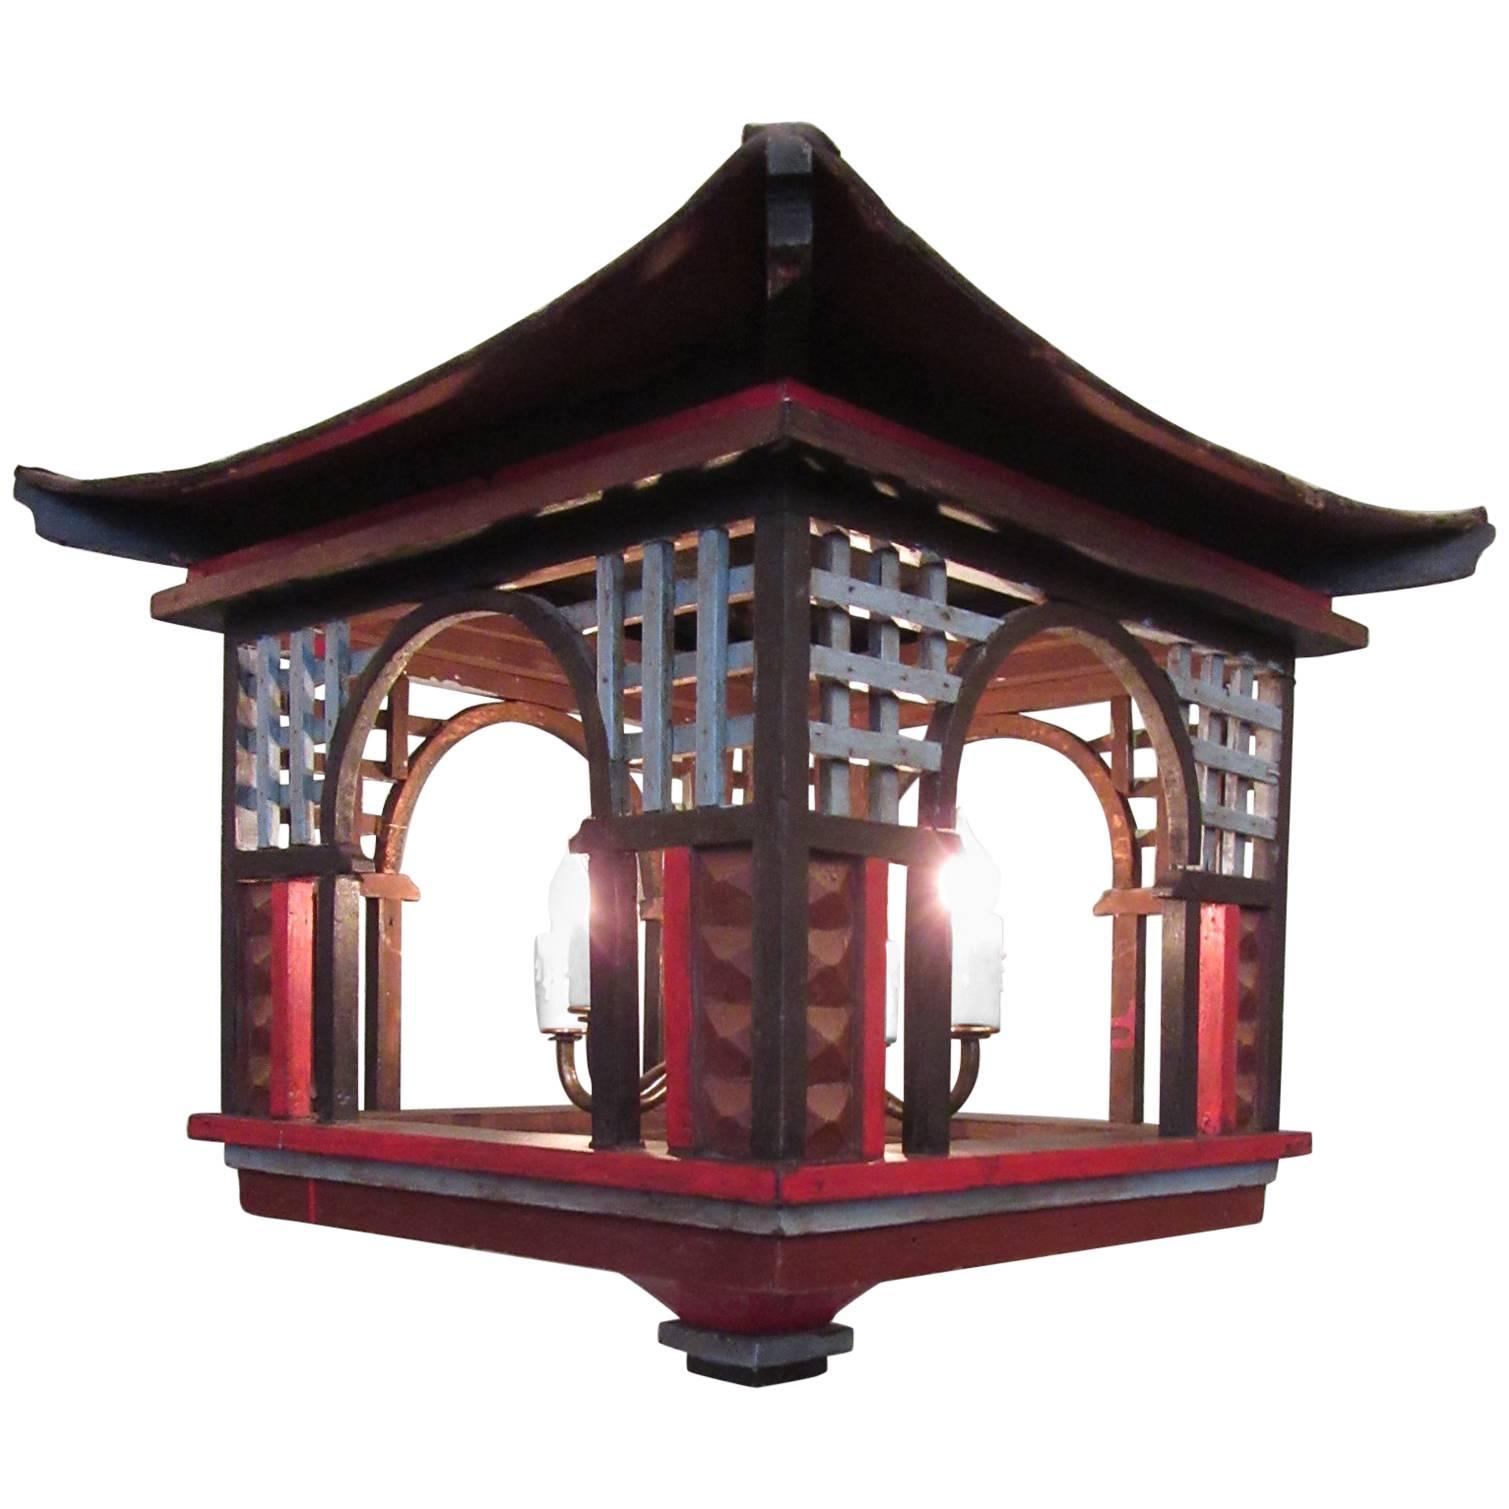 Early 20th Century French Oriental Pagoda Papier Mâché and Wood Lantern